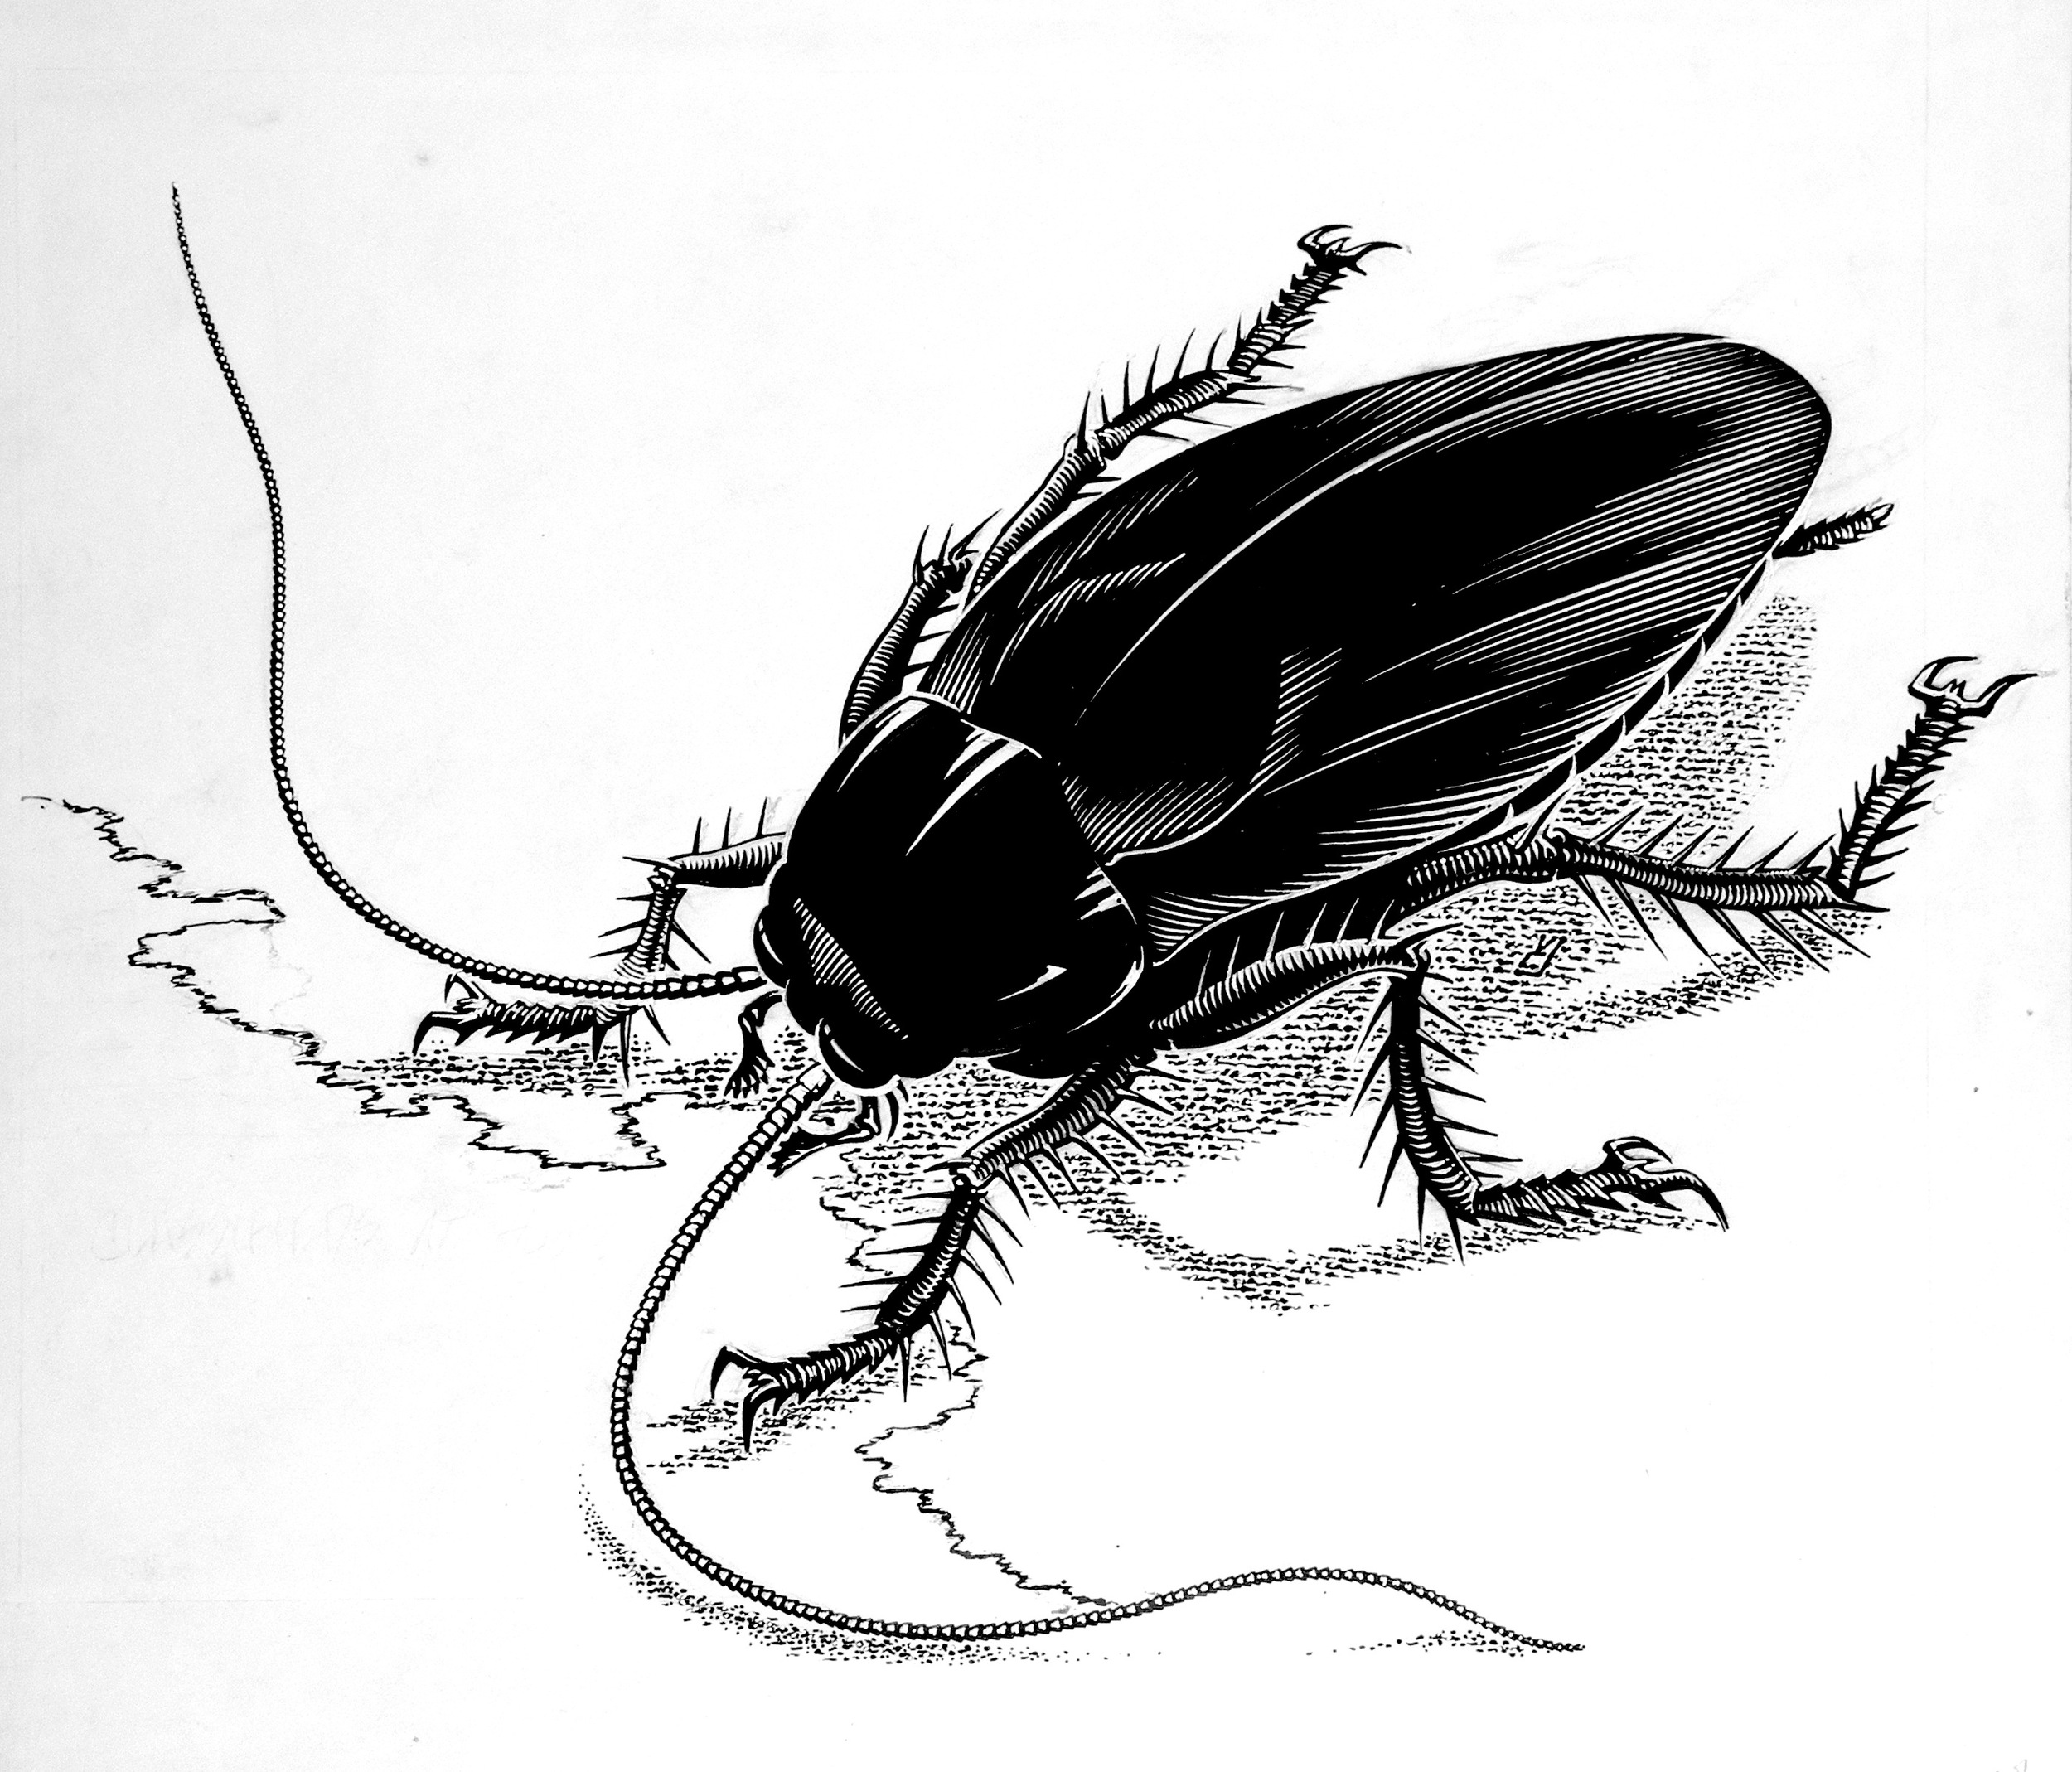 "Cockroach" by Vernon Courtlandt Johnson. © 1980 VCJ. All rights reserved.